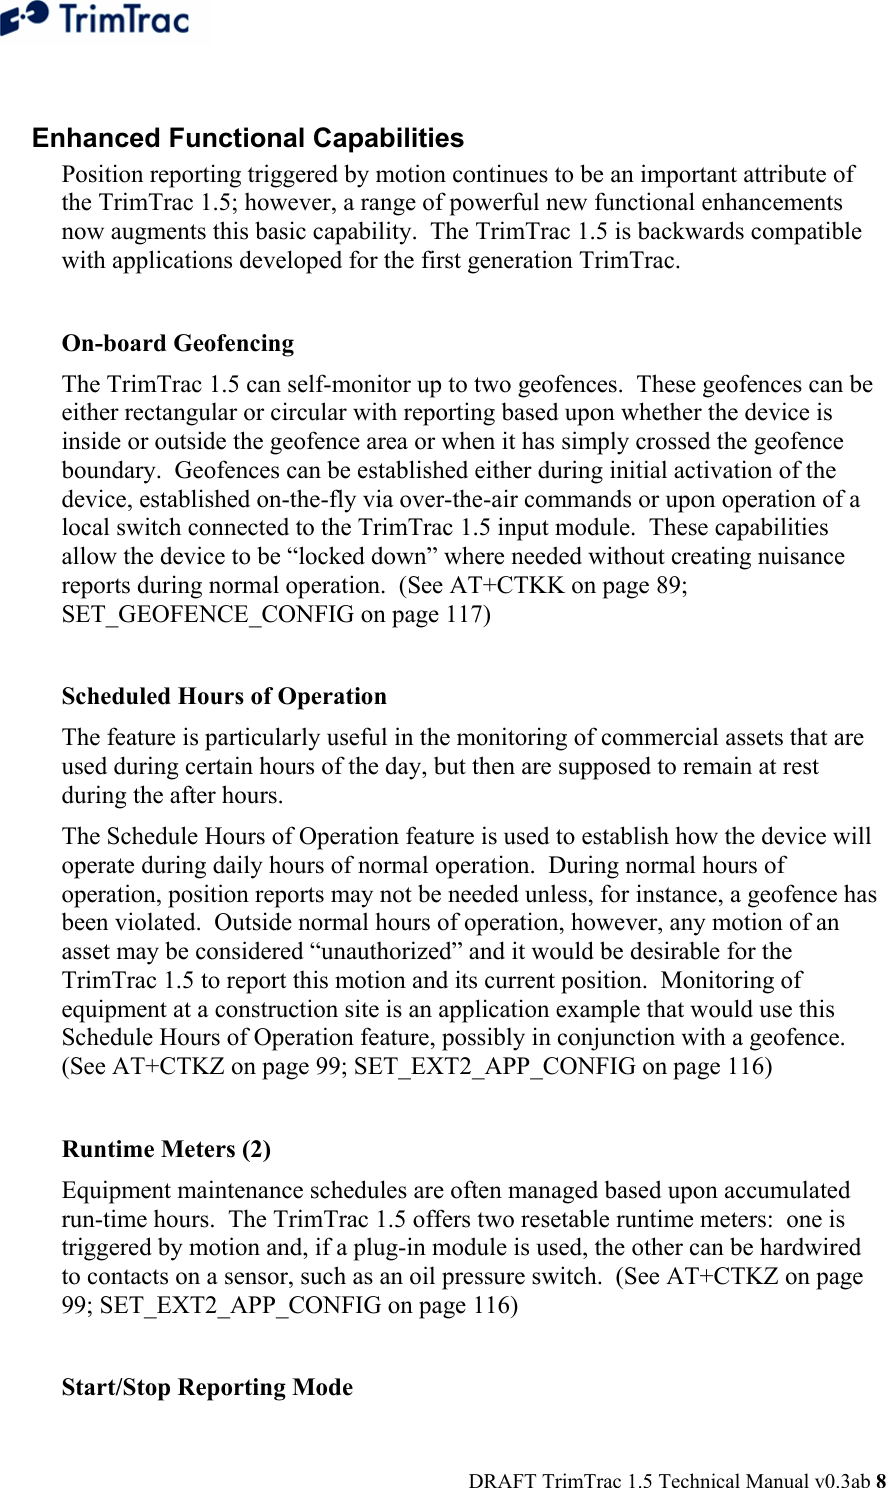  DRAFT TrimTrac 1.5 Technical Manual v0.3ab 8  Enhanced Functional Capabilities Position reporting triggered by motion continues to be an important attribute of the TrimTrac 1.5; however, a range of powerful new functional enhancements now augments this basic capability.  The TrimTrac 1.5 is backwards compatible with applications developed for the first generation TrimTrac.    On-board Geofencing The TrimTrac 1.5 can self-monitor up to two geofences.  These geofences can be either rectangular or circular with reporting based upon whether the device is inside or outside the geofence area or when it has simply crossed the geofence boundary.  Geofences can be established either during initial activation of the device, established on-the-fly via over-the-air commands or upon operation of a local switch connected to the TrimTrac 1.5 input module.  These capabilities allow the device to be “locked down” where needed without creating nuisance reports during normal operation.  (See AT+CTKK on page 89; SET_GEOFENCE_CONFIG on page 117)  Scheduled Hours of Operation The feature is particularly useful in the monitoring of commercial assets that are used during certain hours of the day, but then are supposed to remain at rest during the after hours. The Schedule Hours of Operation feature is used to establish how the device will operate during daily hours of normal operation.  During normal hours of operation, position reports may not be needed unless, for instance, a geofence has been violated.  Outside normal hours of operation, however, any motion of an asset may be considered “unauthorized” and it would be desirable for the TrimTrac 1.5 to report this motion and its current position.  Monitoring of equipment at a construction site is an application example that would use this Schedule Hours of Operation feature, possibly in conjunction with a geofence. (See AT+CTKZ on page 99; SET_EXT2_APP_CONFIG on page 116)  Runtime Meters (2) Equipment maintenance schedules are often managed based upon accumulated run-time hours.  The TrimTrac 1.5 offers two resetable runtime meters:  one is triggered by motion and, if a plug-in module is used, the other can be hardwired to contacts on a sensor, such as an oil pressure switch.  (See AT+CTKZ on page 99; SET_EXT2_APP_CONFIG on page 116)  Start/Stop Reporting Mode 